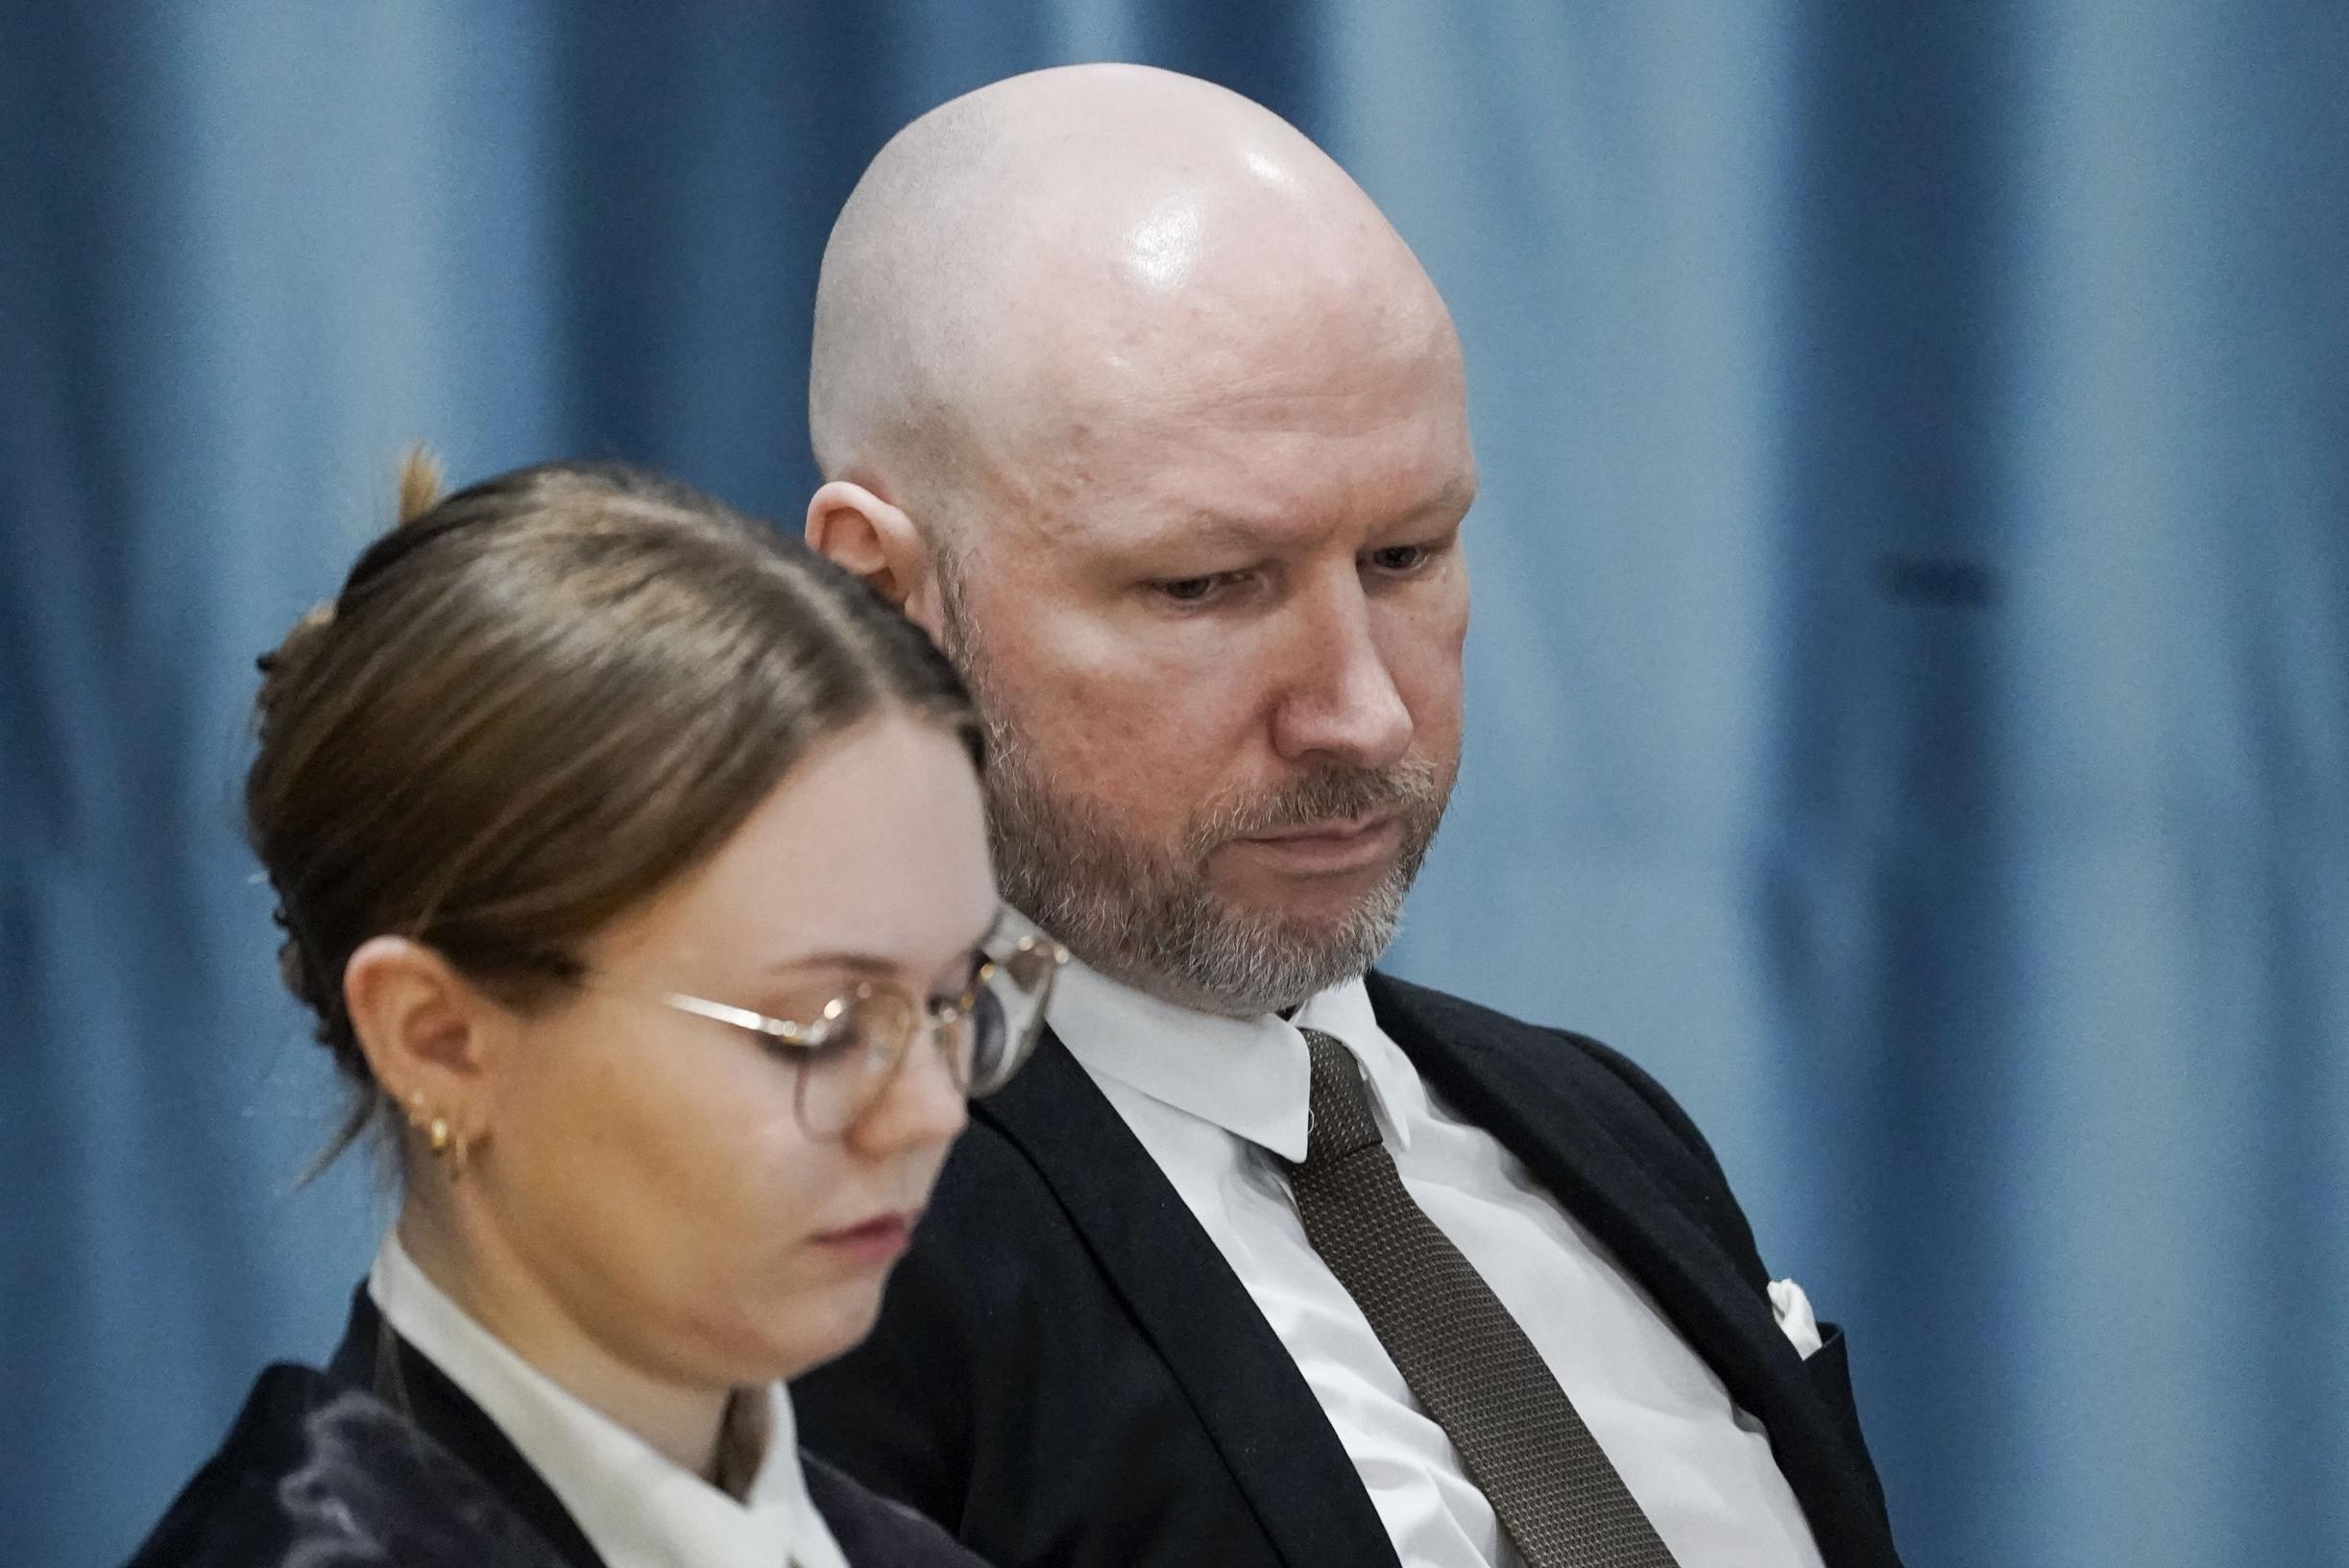 Anders Breivik’s unexpected tears raise skepticism among experts, who say he is not suicidal